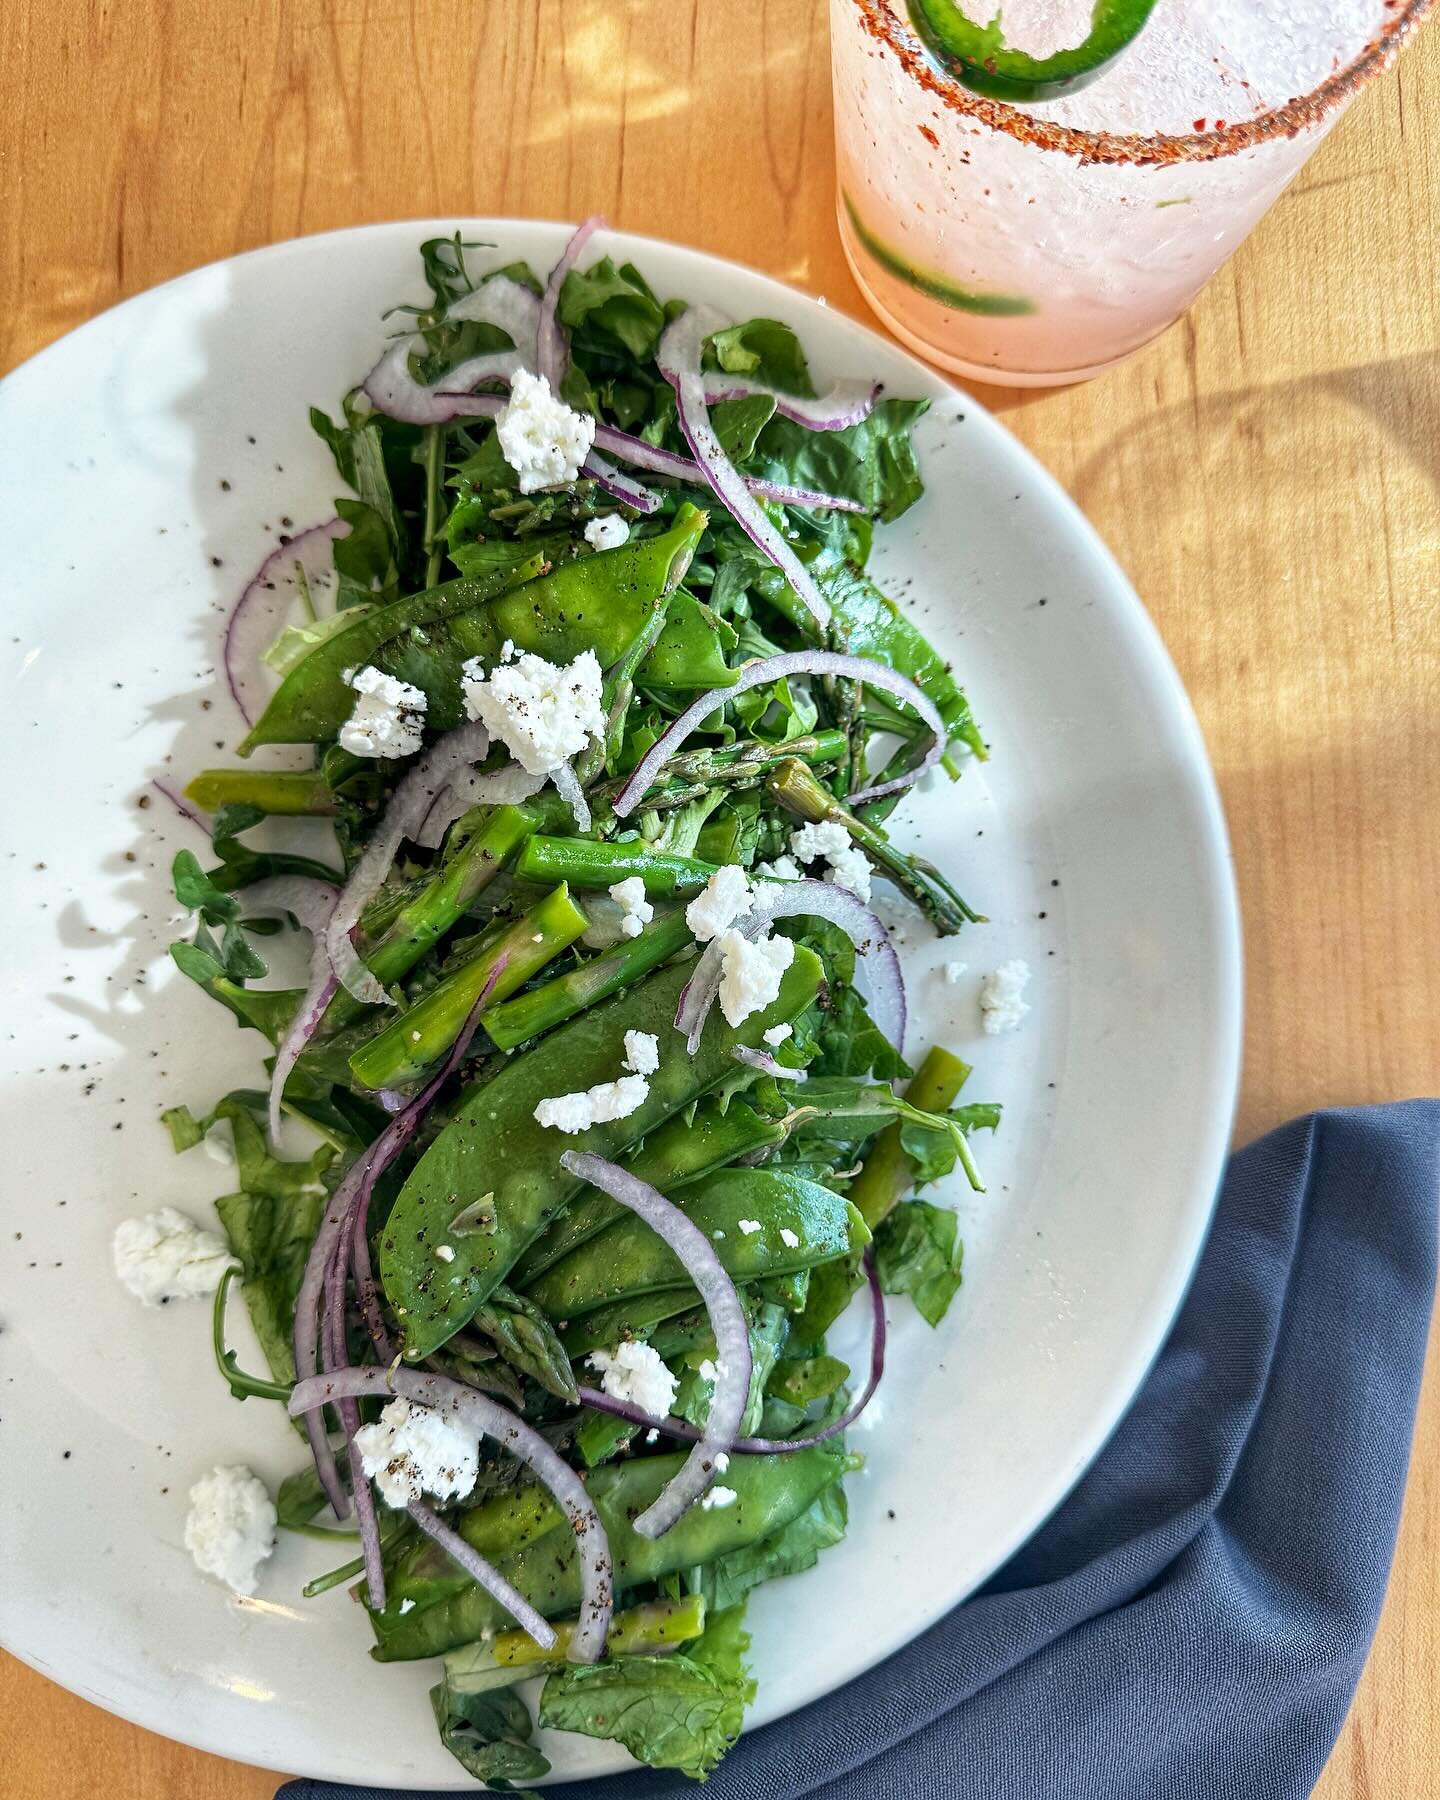 Our minds are on Spring! 🌷Asparagus Salad with Snow Peas, Goat Cheese, Red Wine Vinaigrette, Shaved Onion + Spicy Paloma